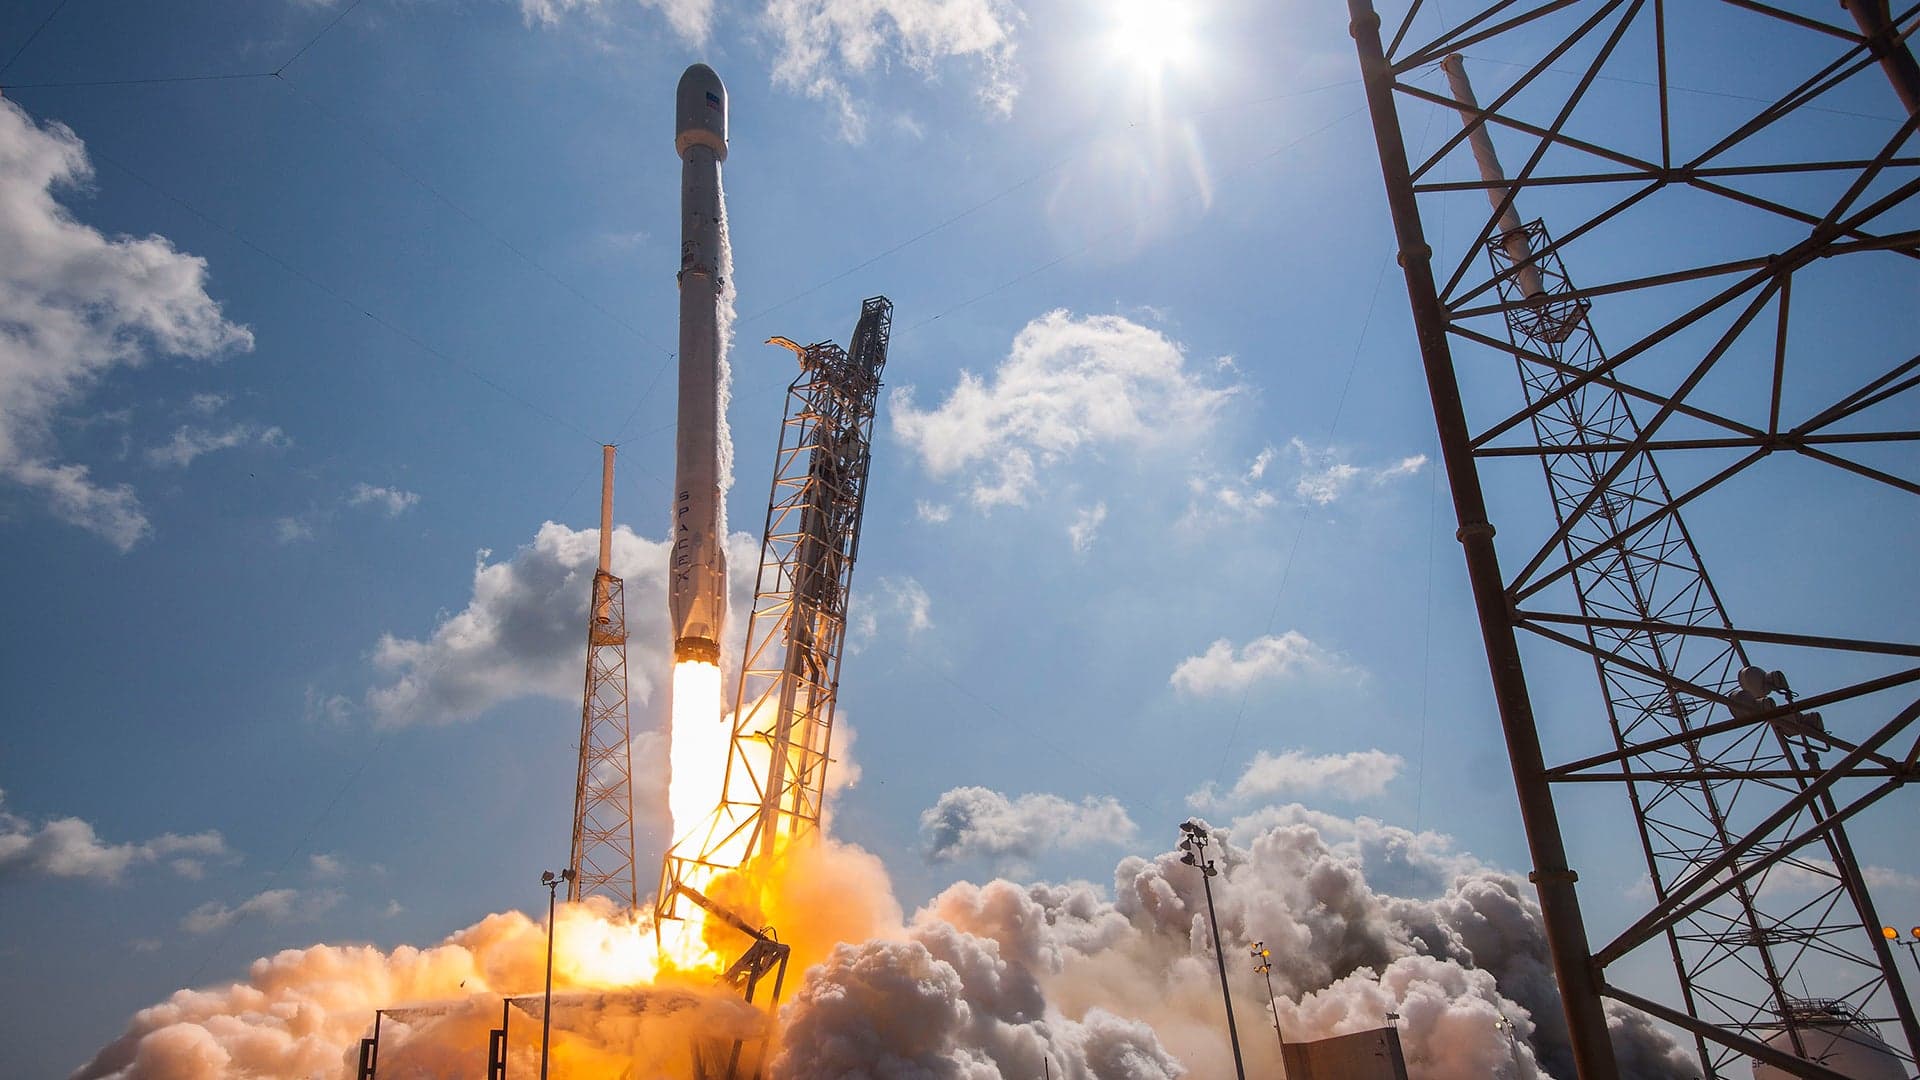 Watch SpaceX’s Falcon 9 Rocket Launch a Massive Satellite into High Earth Orbit